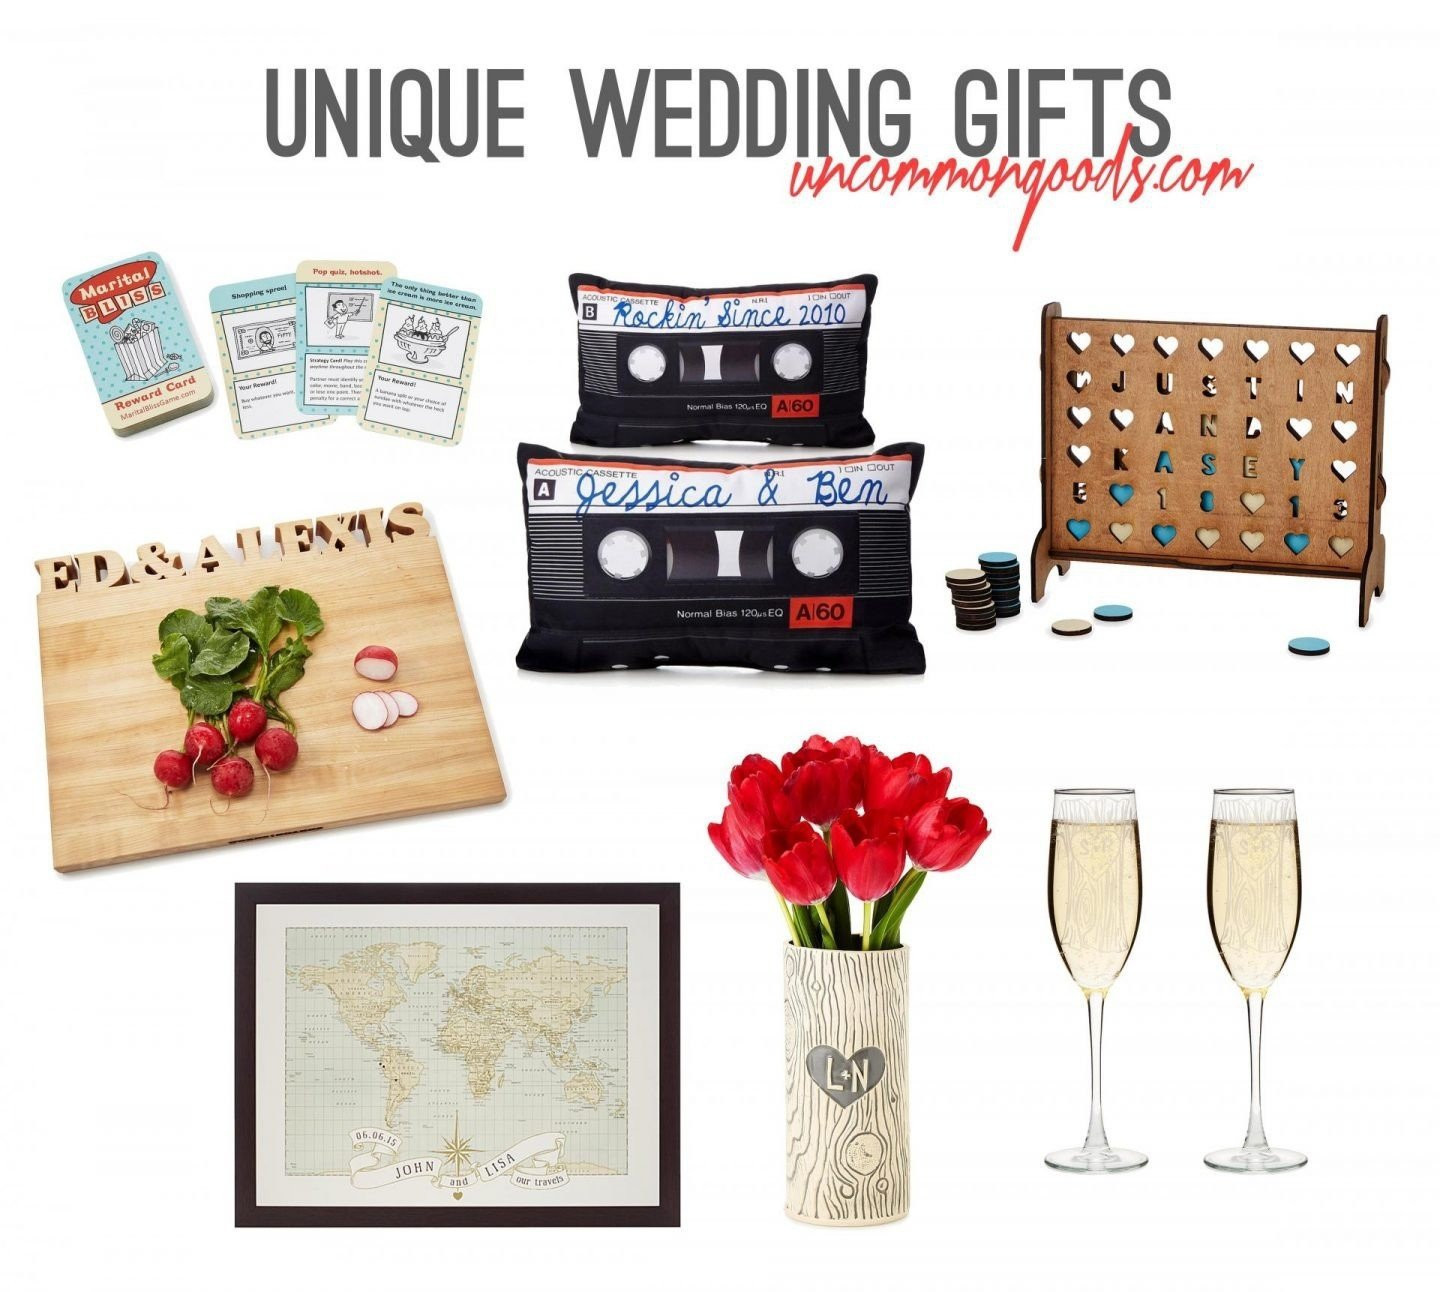 Gift Ideas For Older Couples
 20 the Best Ideas for Gift Ideas for Older Couples